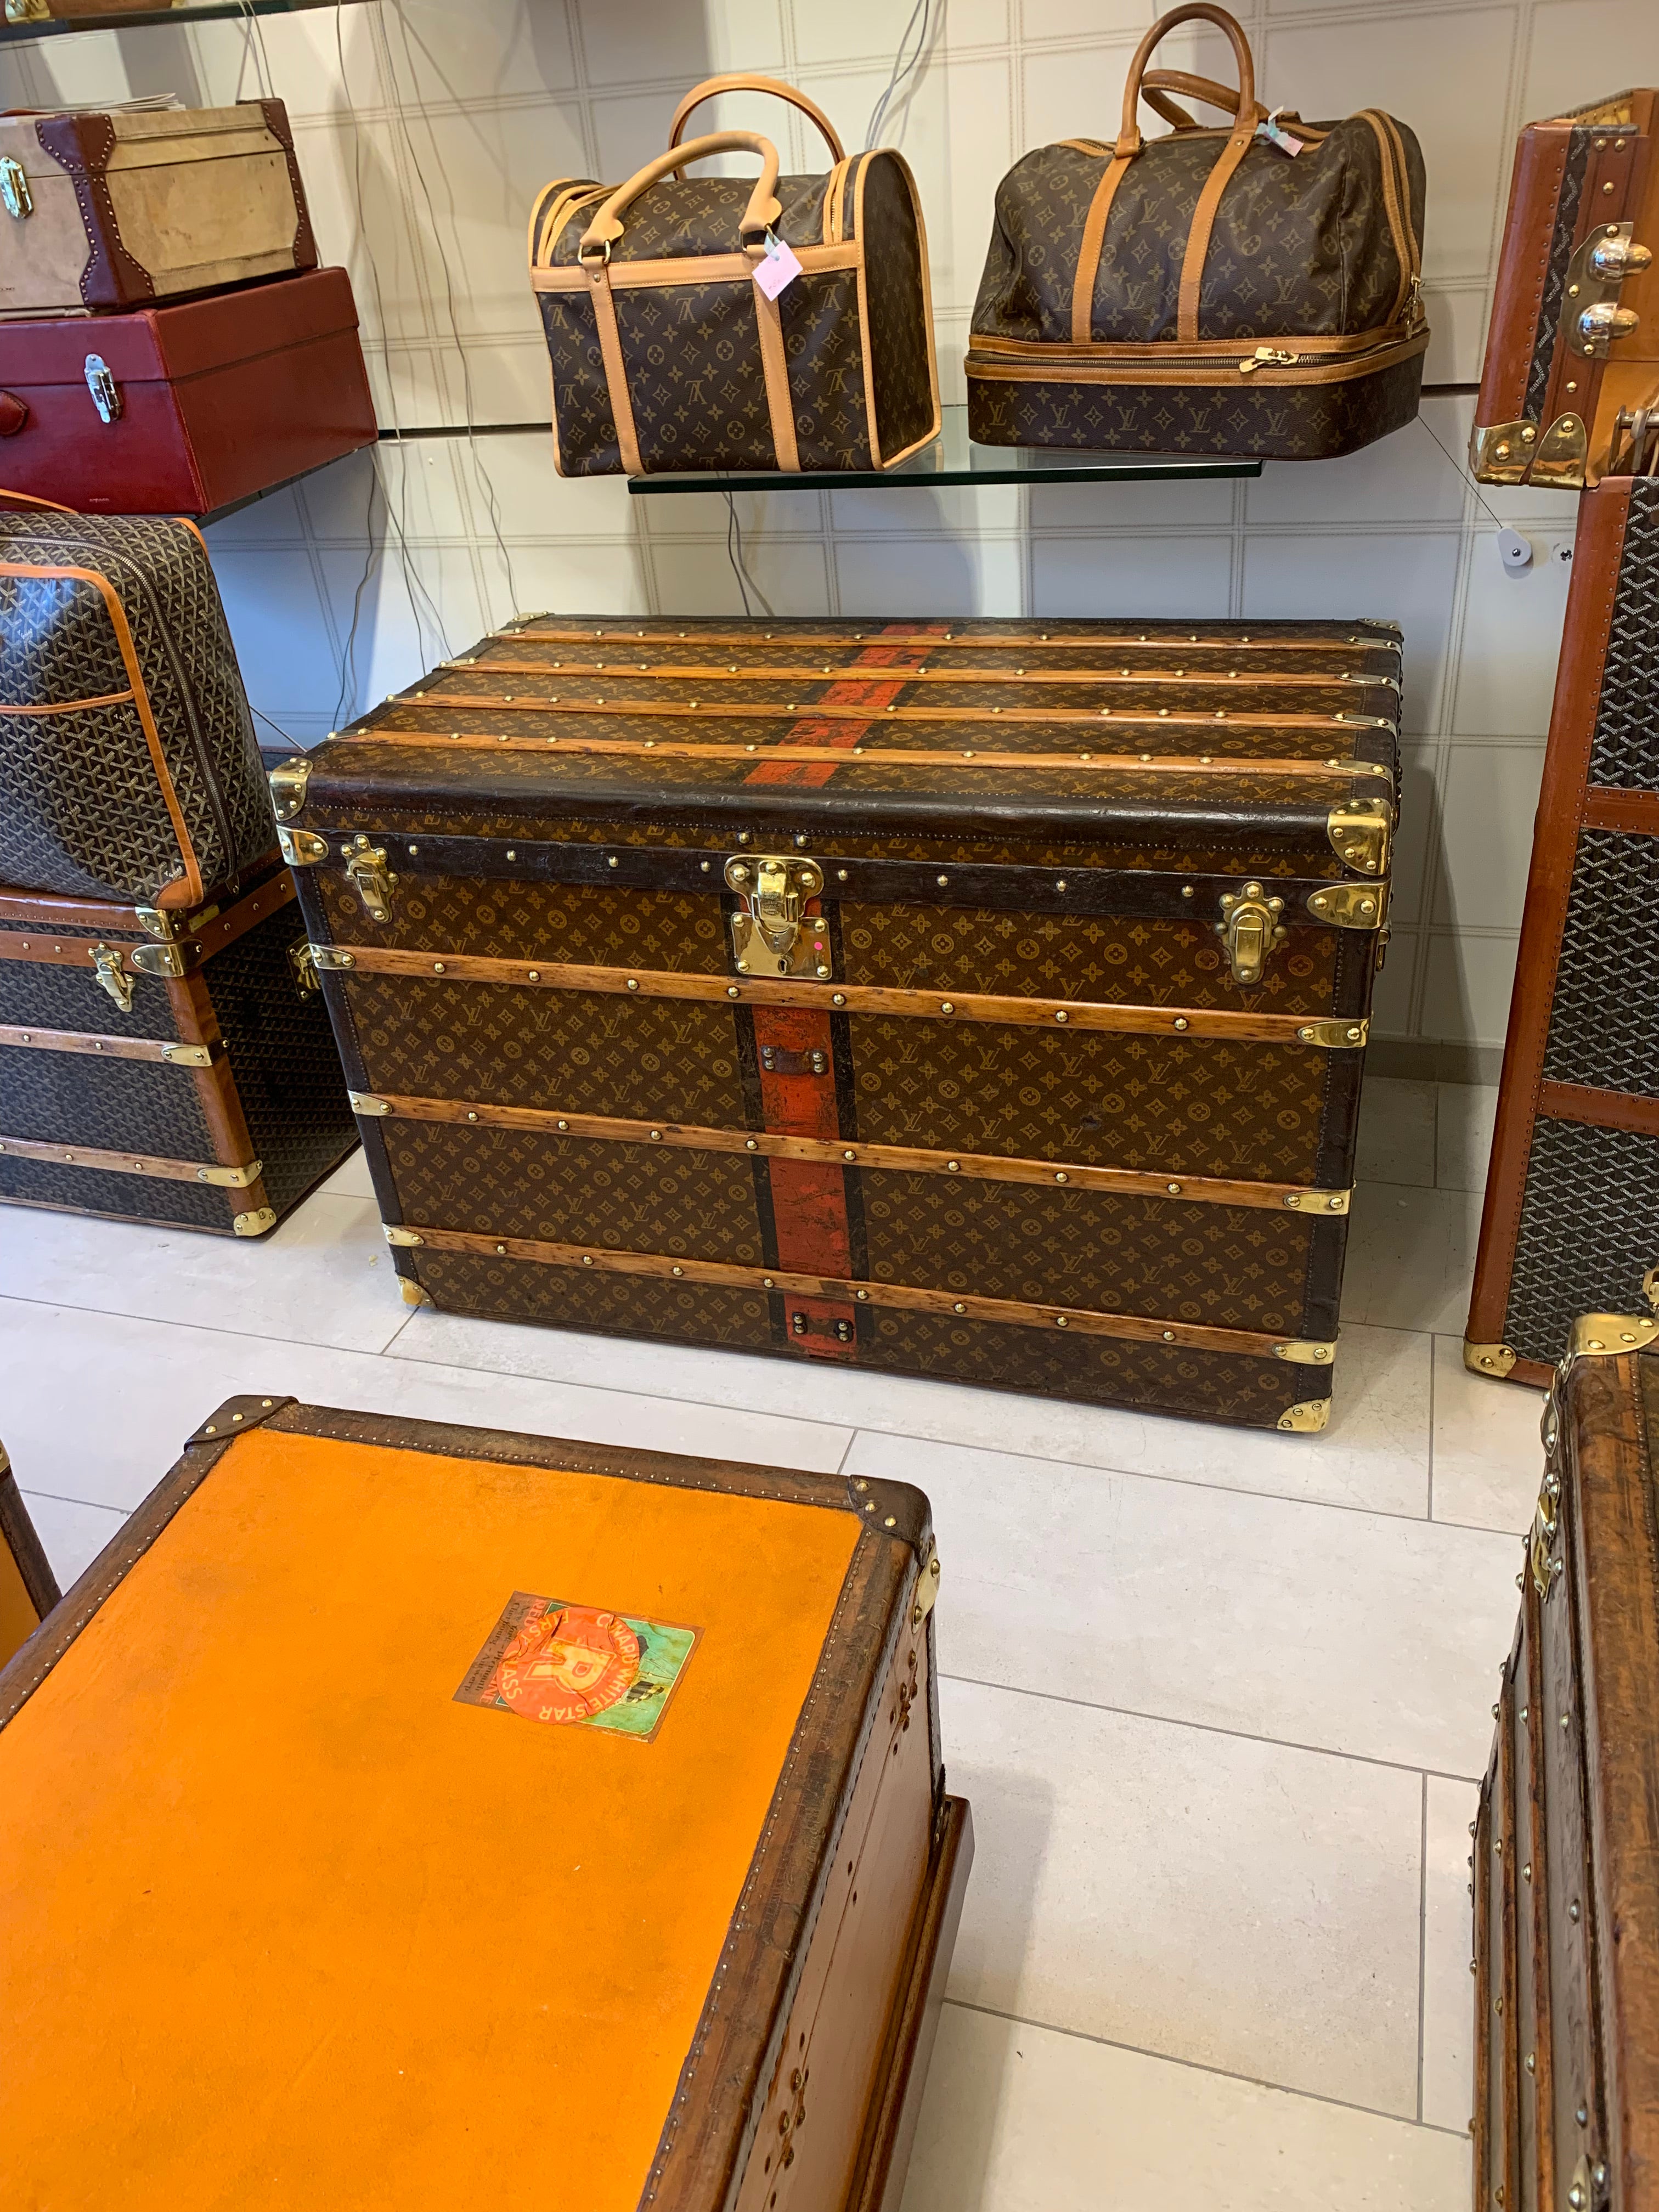 RED ROSE Antiques - Stack of Louis Vuitton luggage